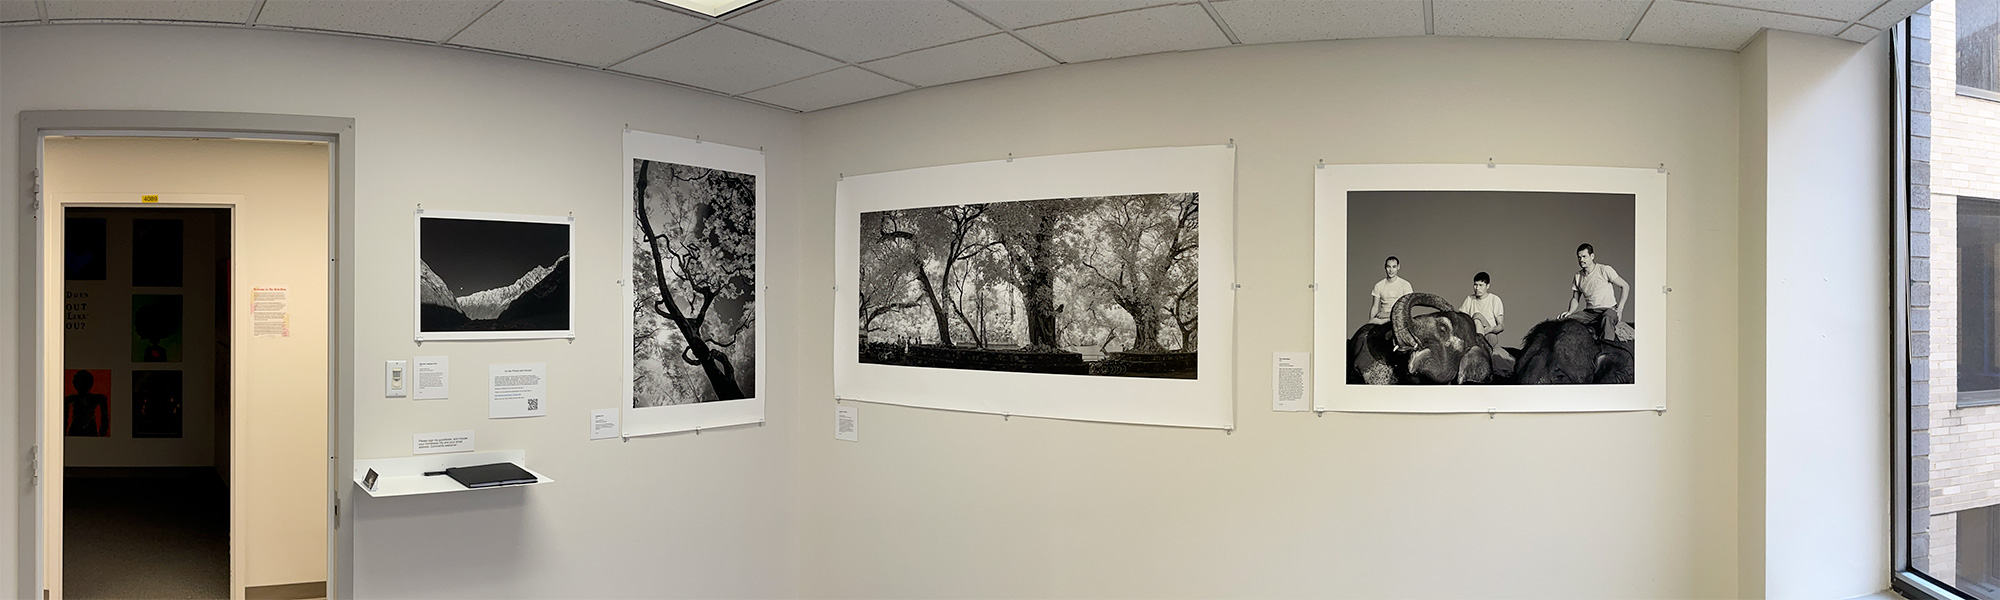 Small Installation of Large Infrared Photos.